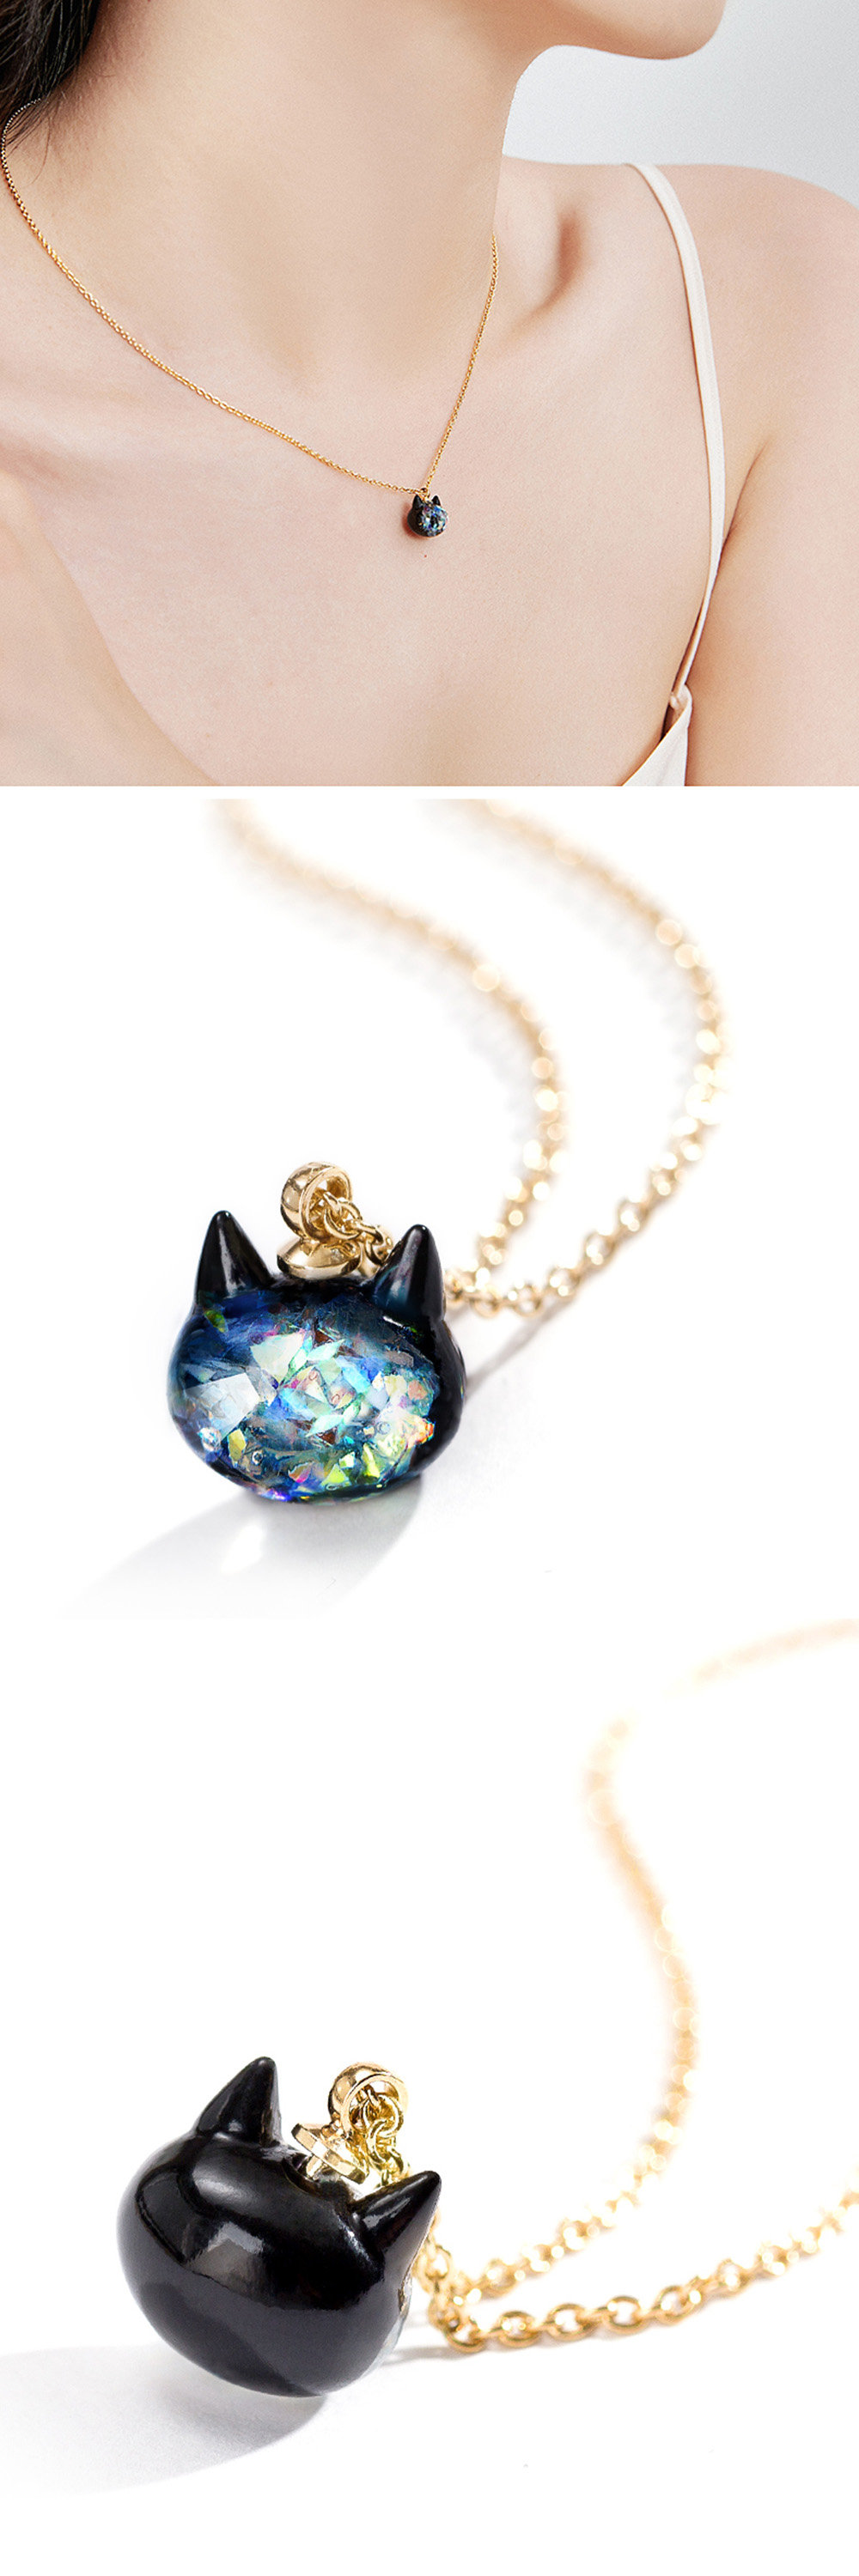 Obsidian Cat Head Necklace – The Triceratory